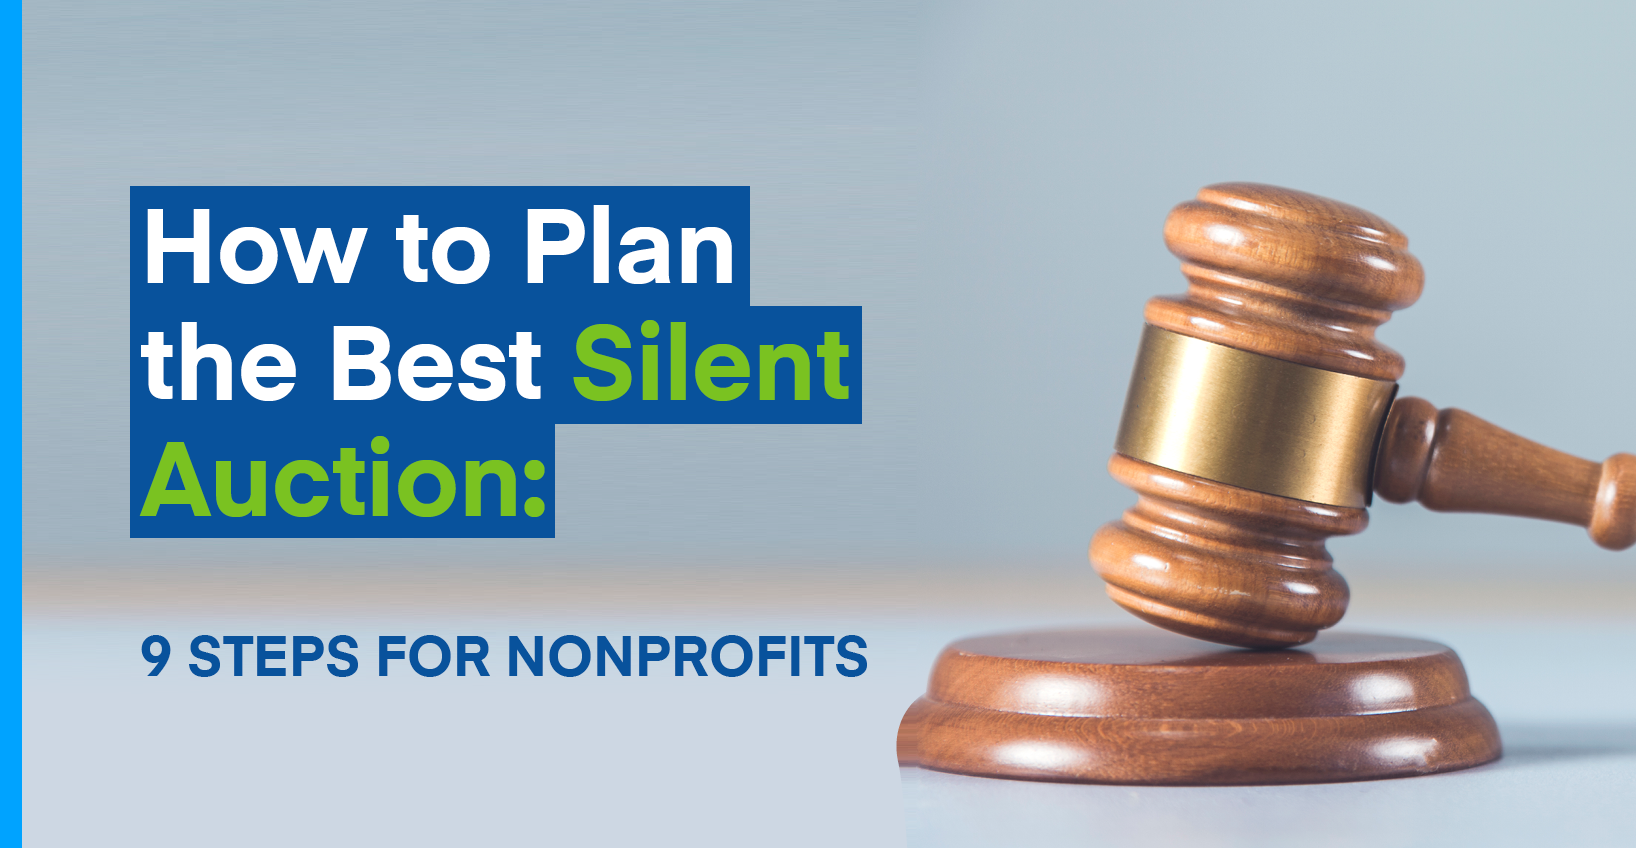 How to Plan the Best Silent Auction: 9 Steps for Nonprofits